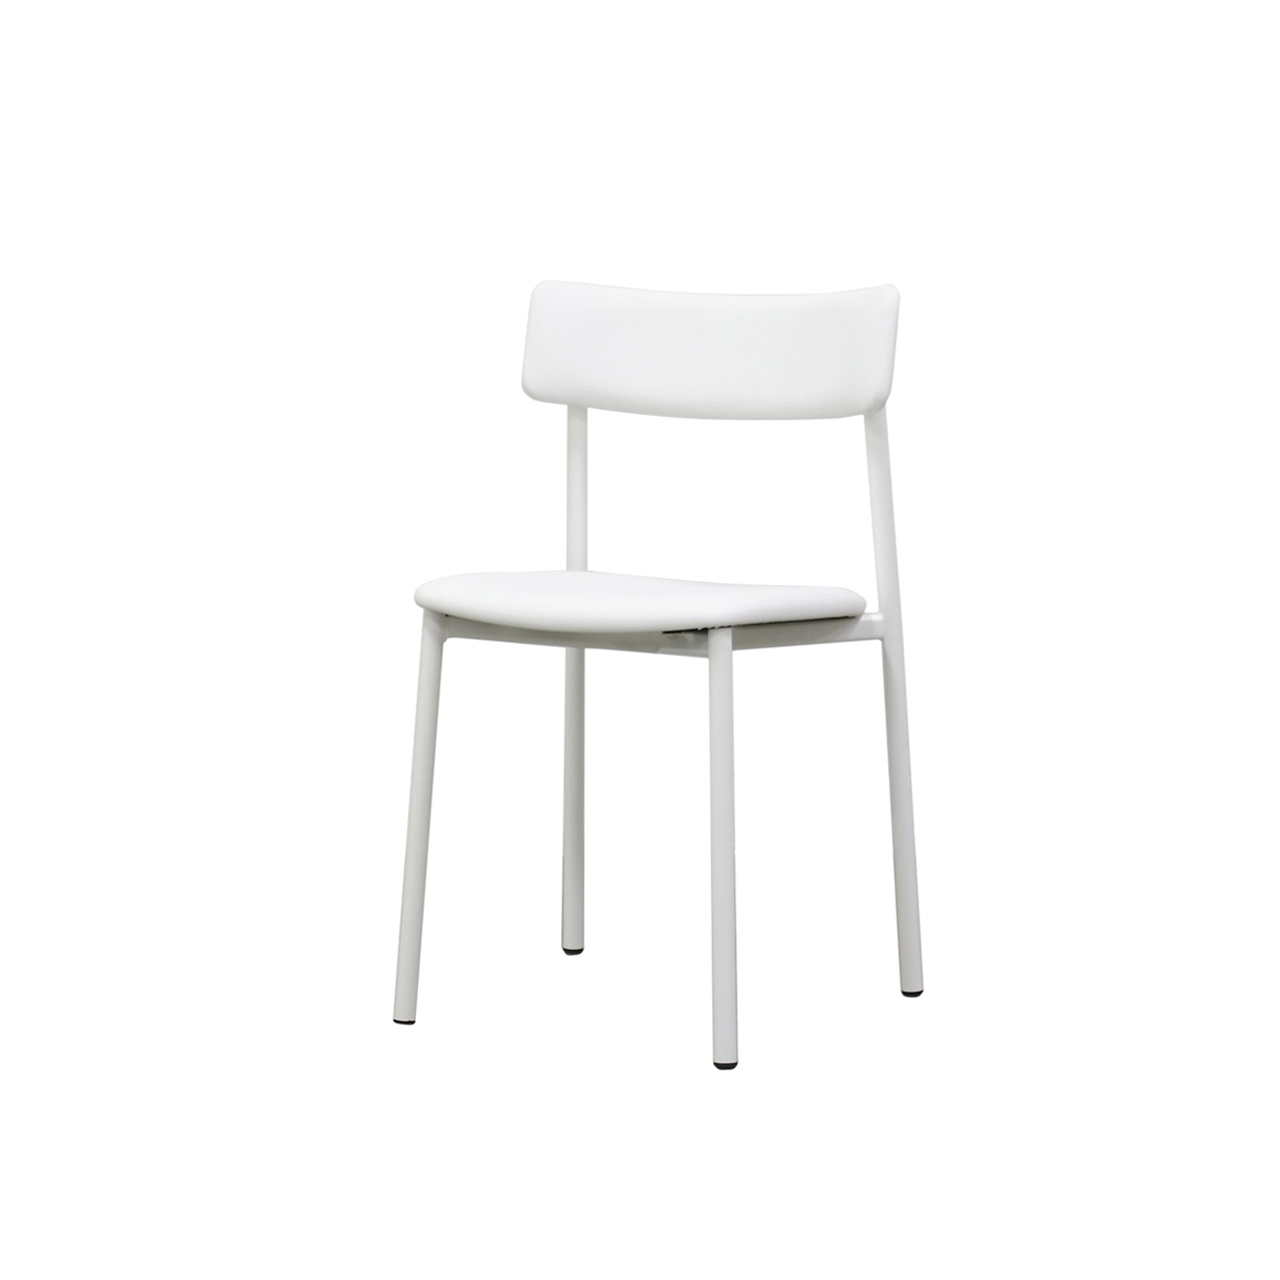 CONNUBIA BY CALLIGARISUP CHAIR  업 체어 (화이트)MADE IN ITALY